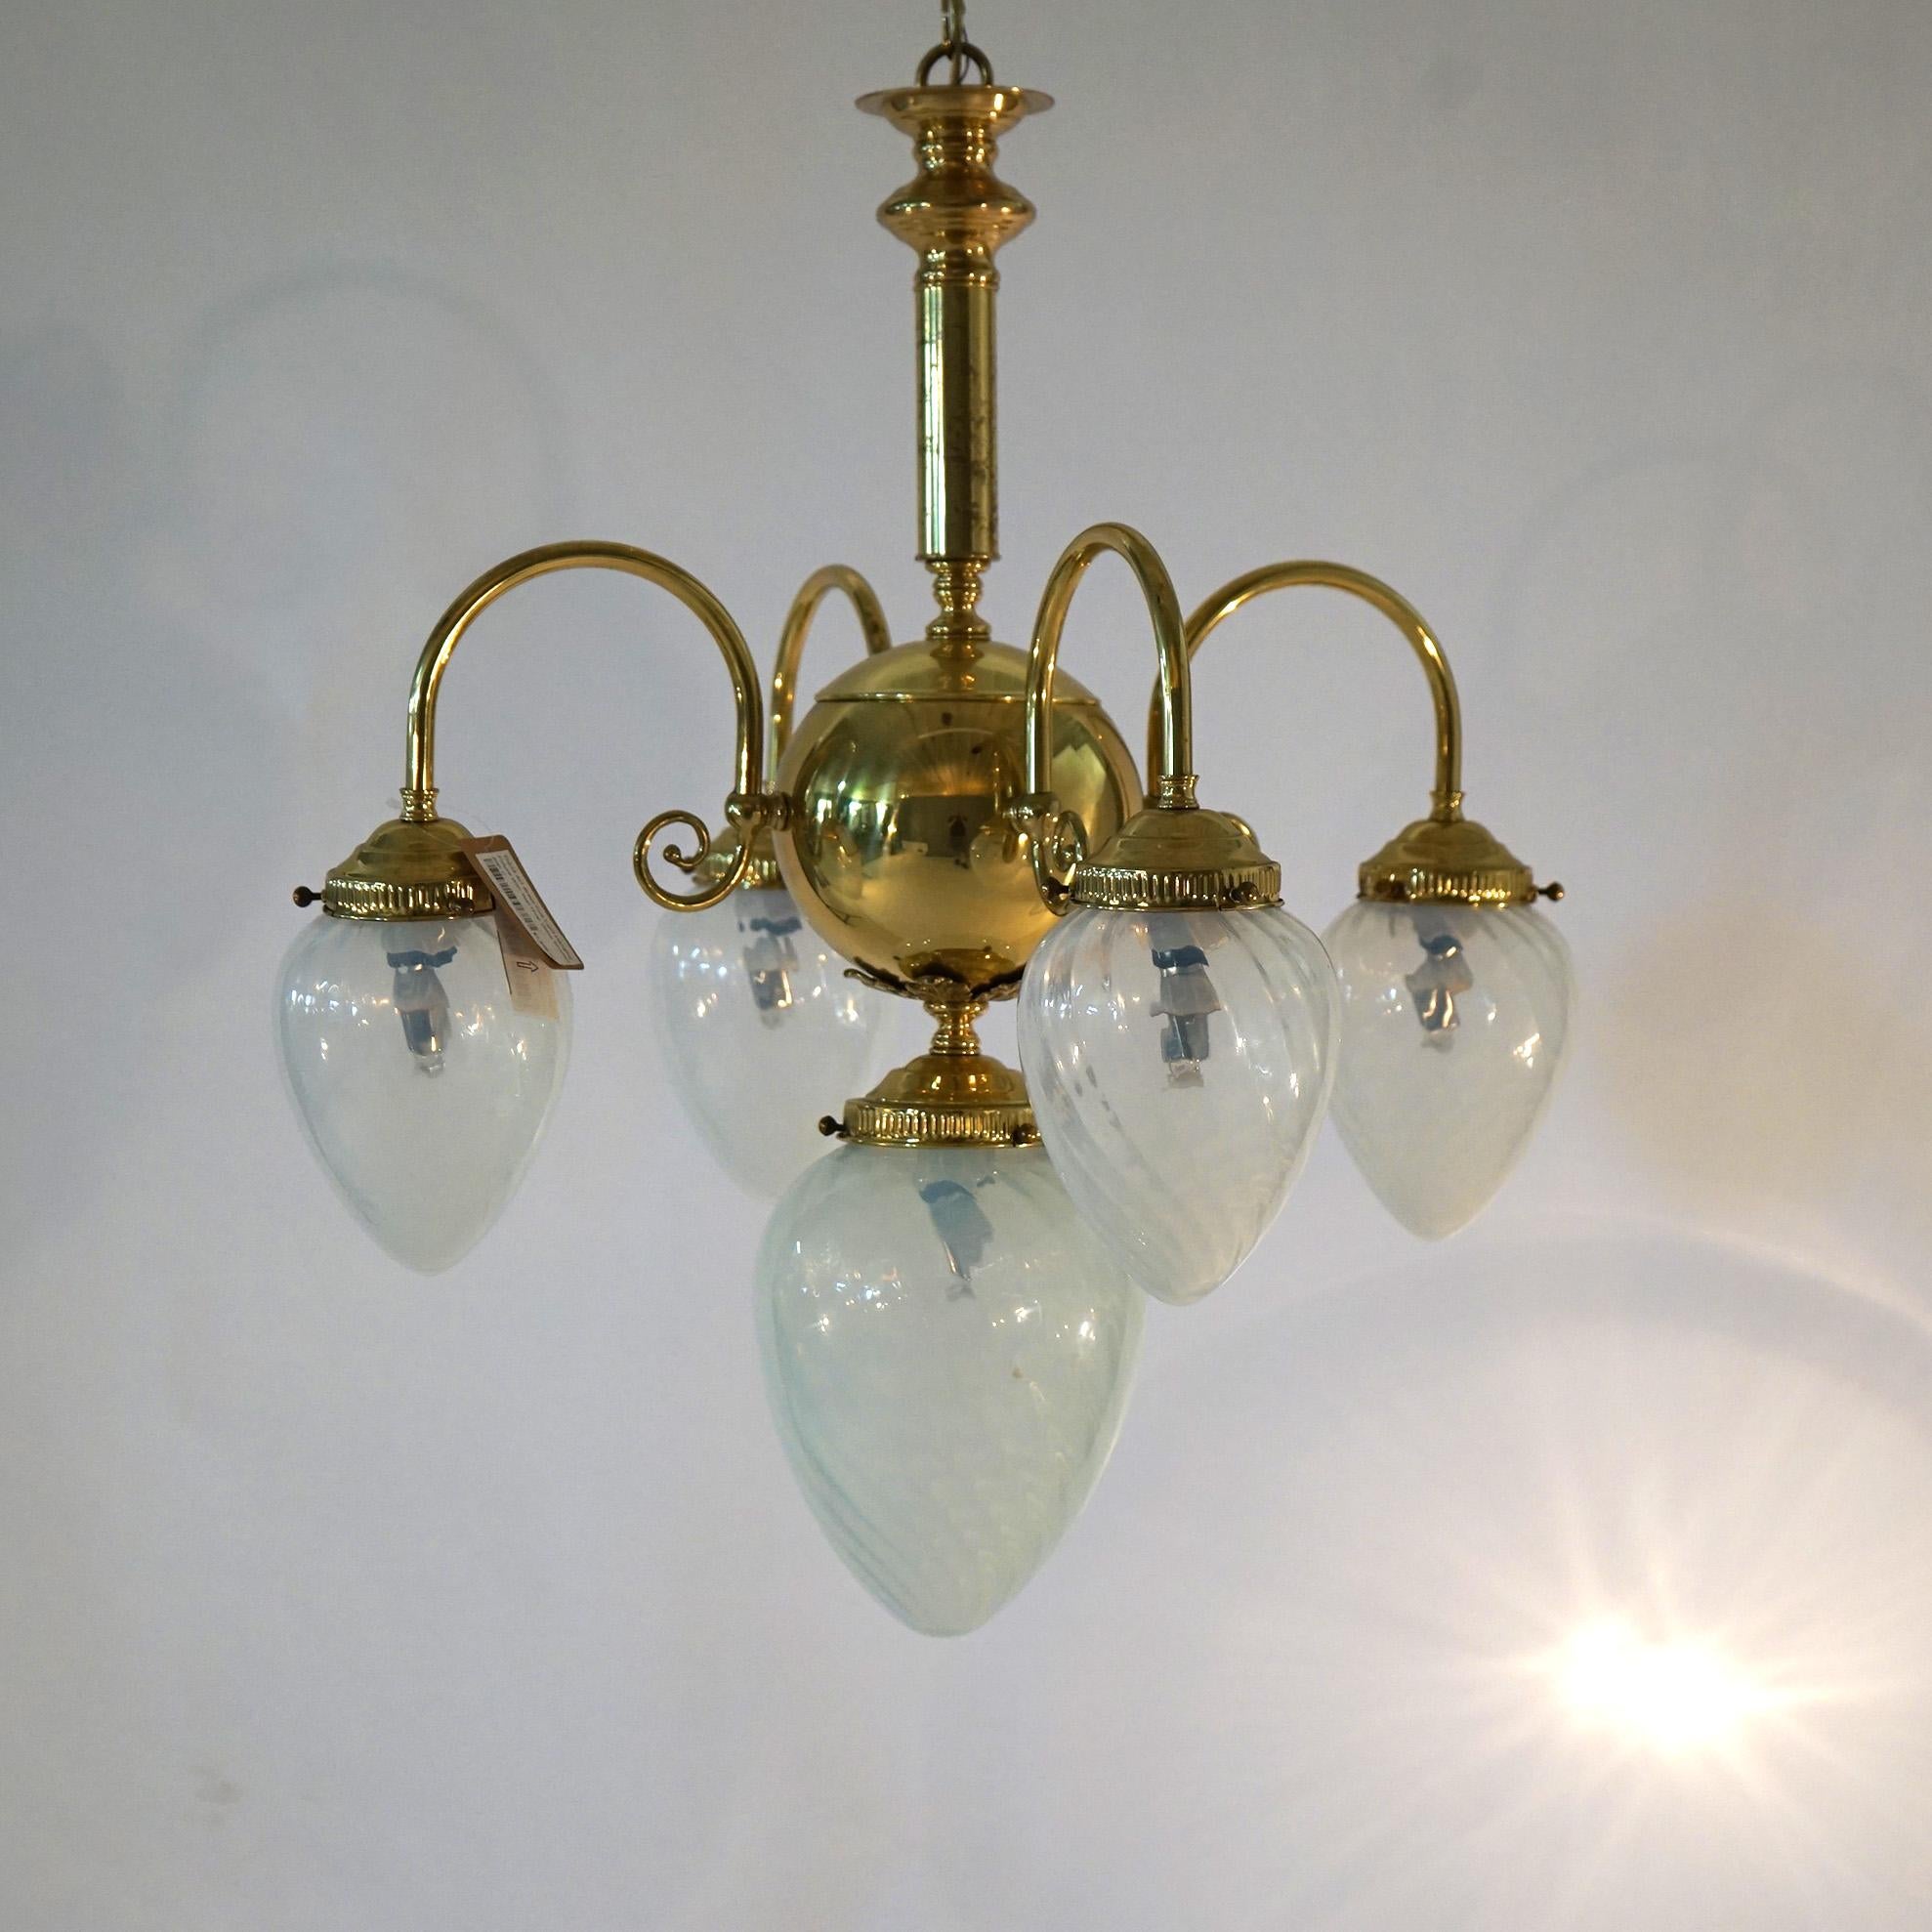 Brass Five-Light Hanging Fixture with Tear Drop Swirl Glass Shades 20th C For Sale 1